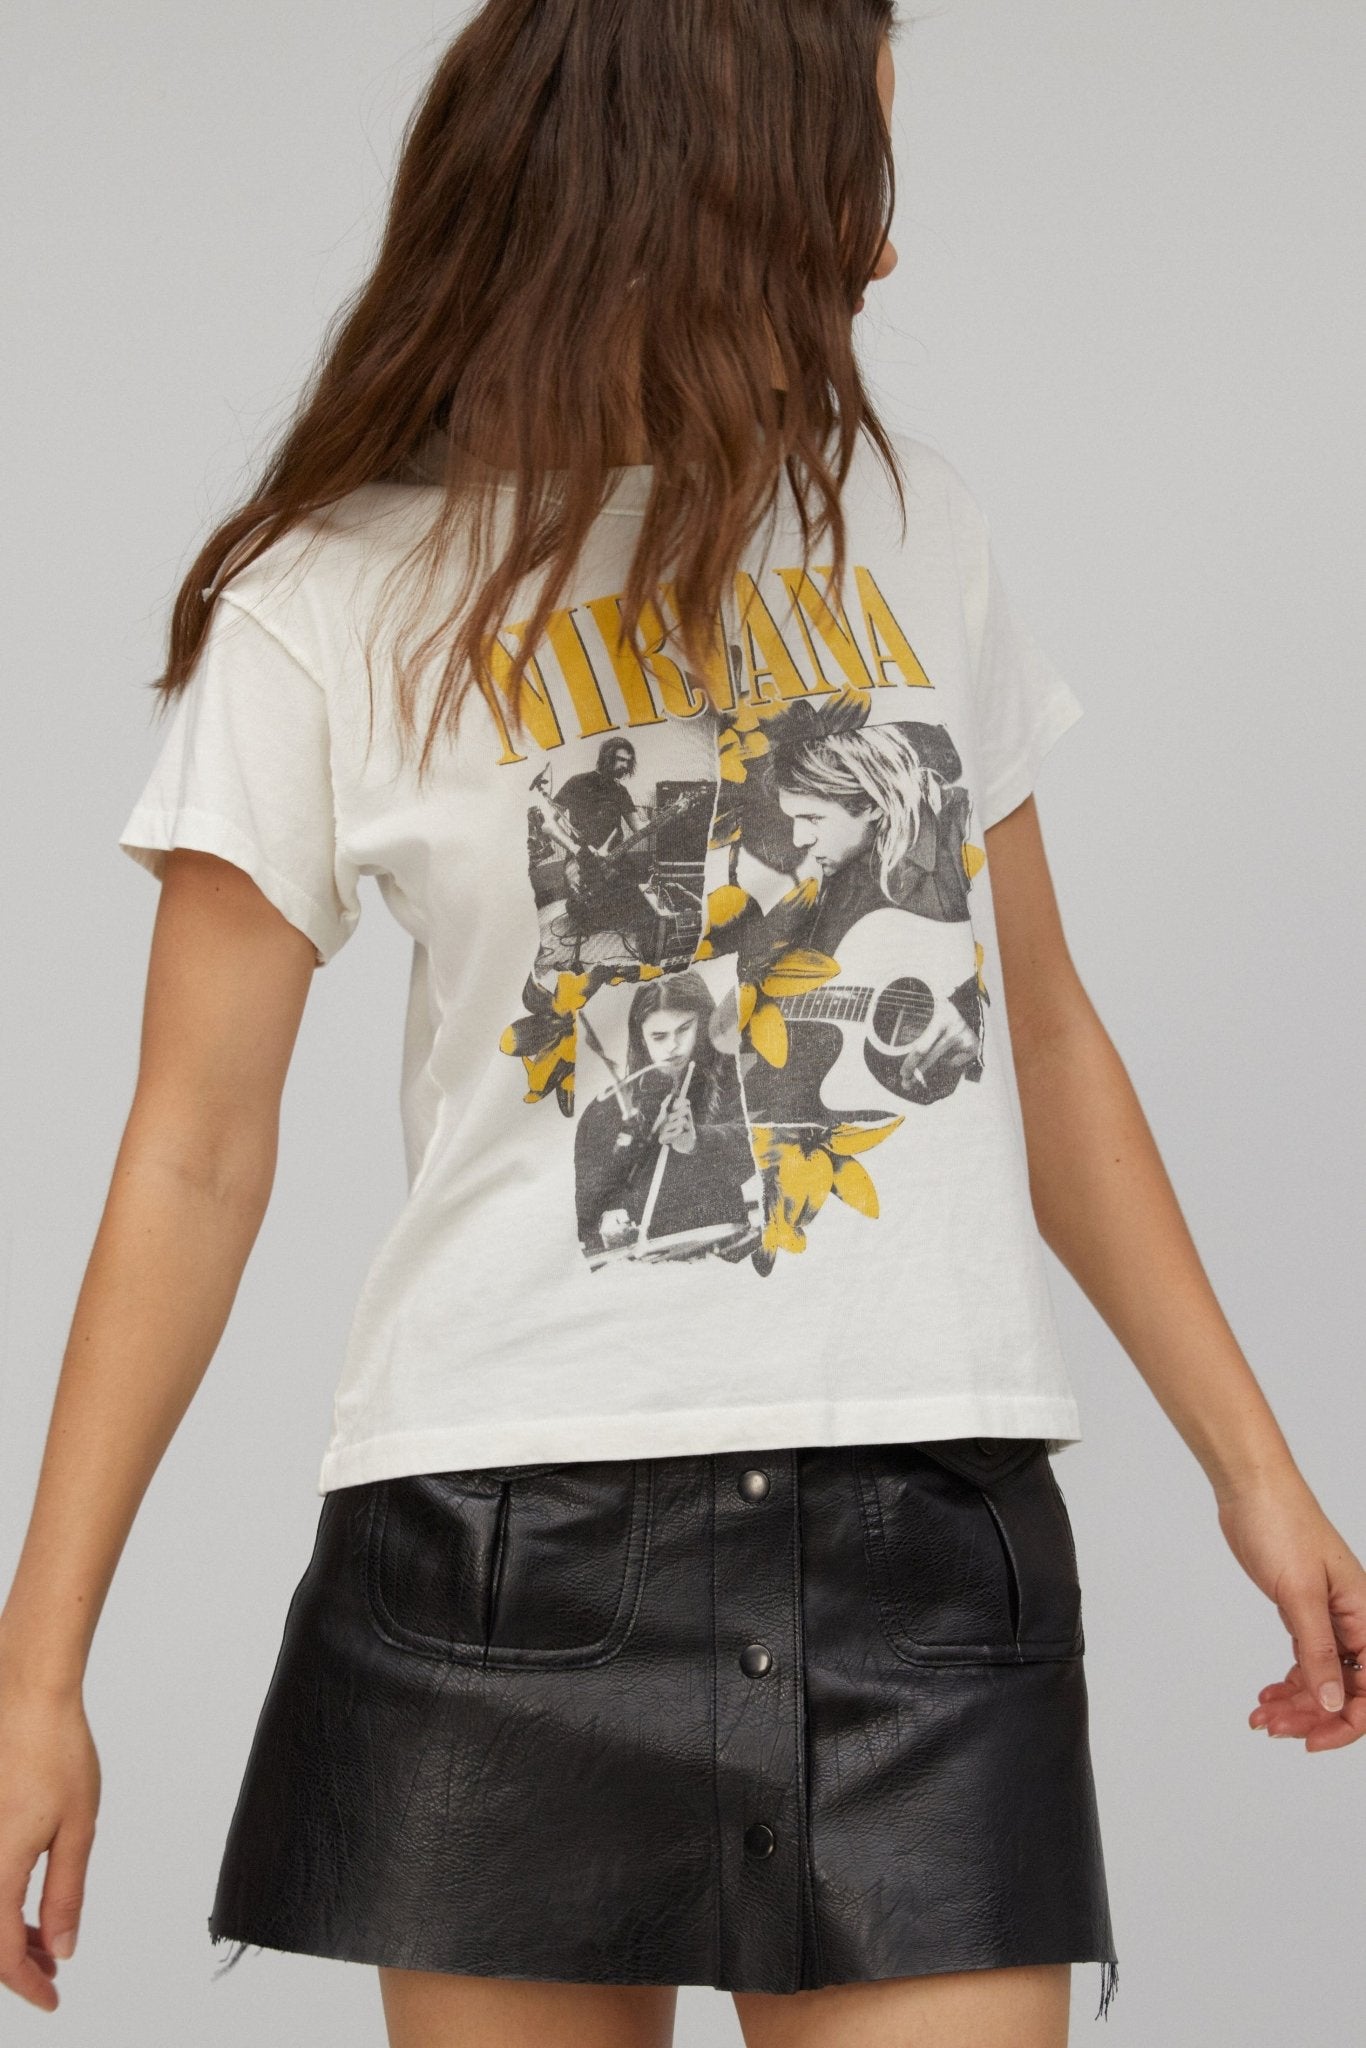 DAYDREAMER Nirvana Collage Reverse Girlfriend Tee in Vintage White - Graphic Tee - Blooming Daily